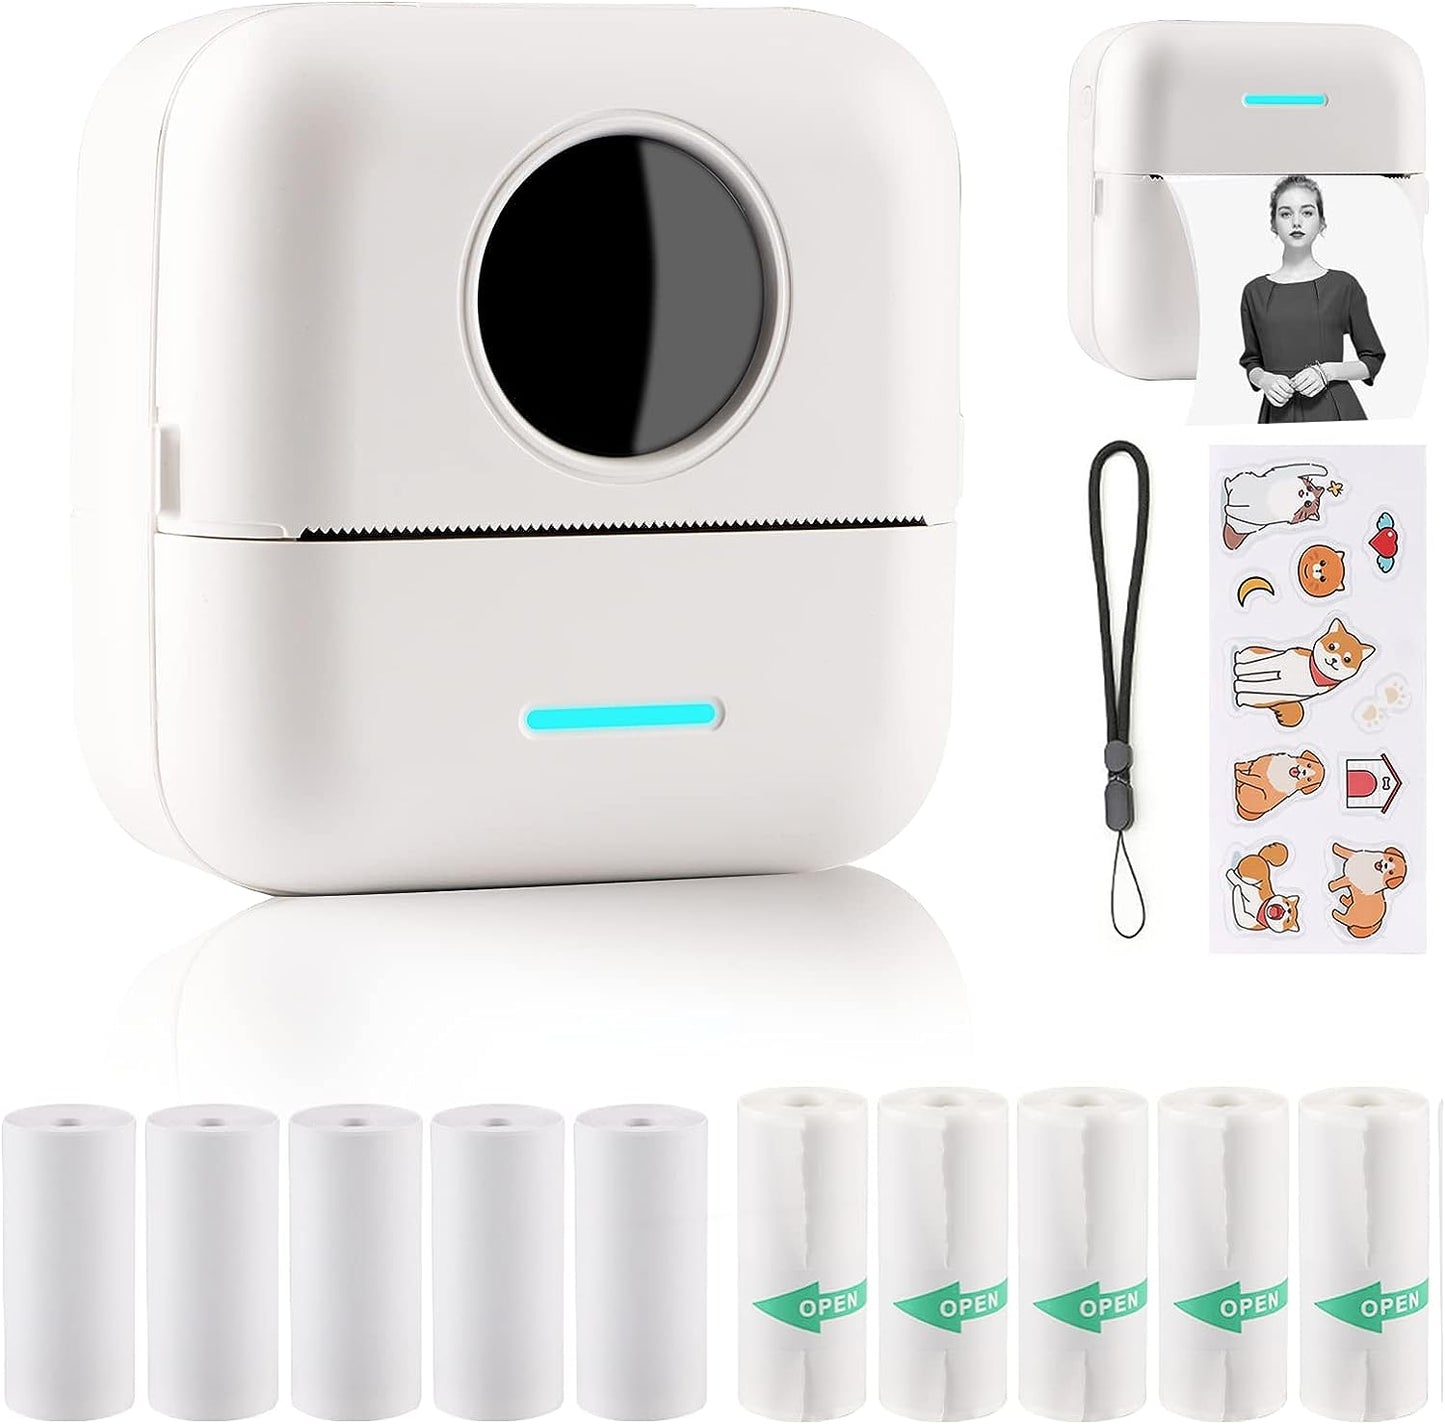 Mini Sticker Printer Bluetooth Smart Pocket Inkless Thermal Printer with 10 Rolls Thermal Paper and Sticker for iOS&Android, Portable Receipt Printer for Photo Journal Notes Memo